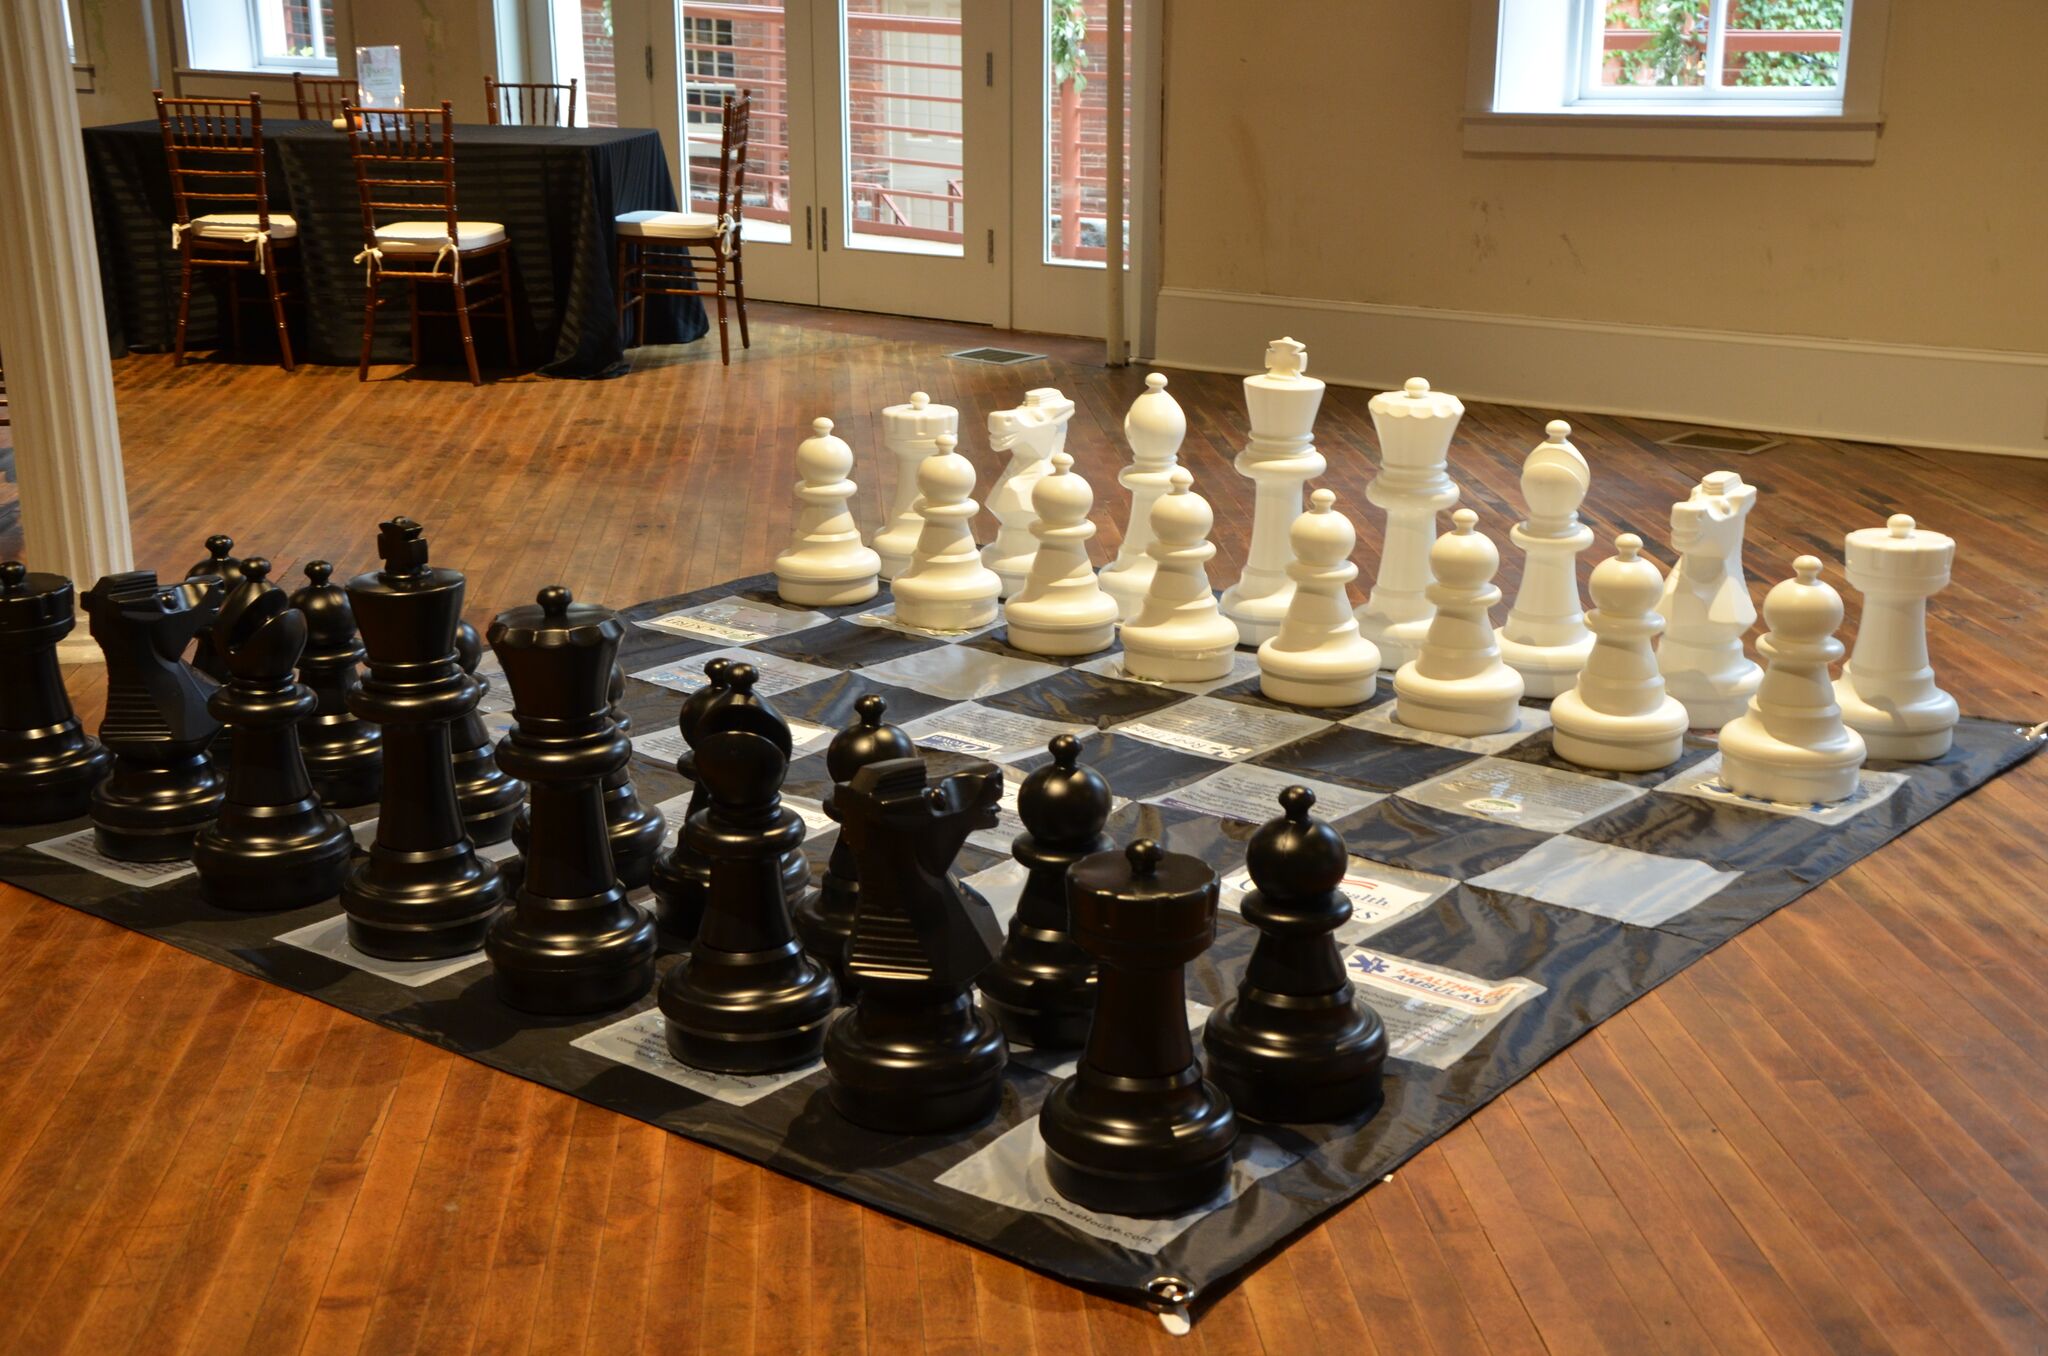 Giant chess set up in Grand Salon